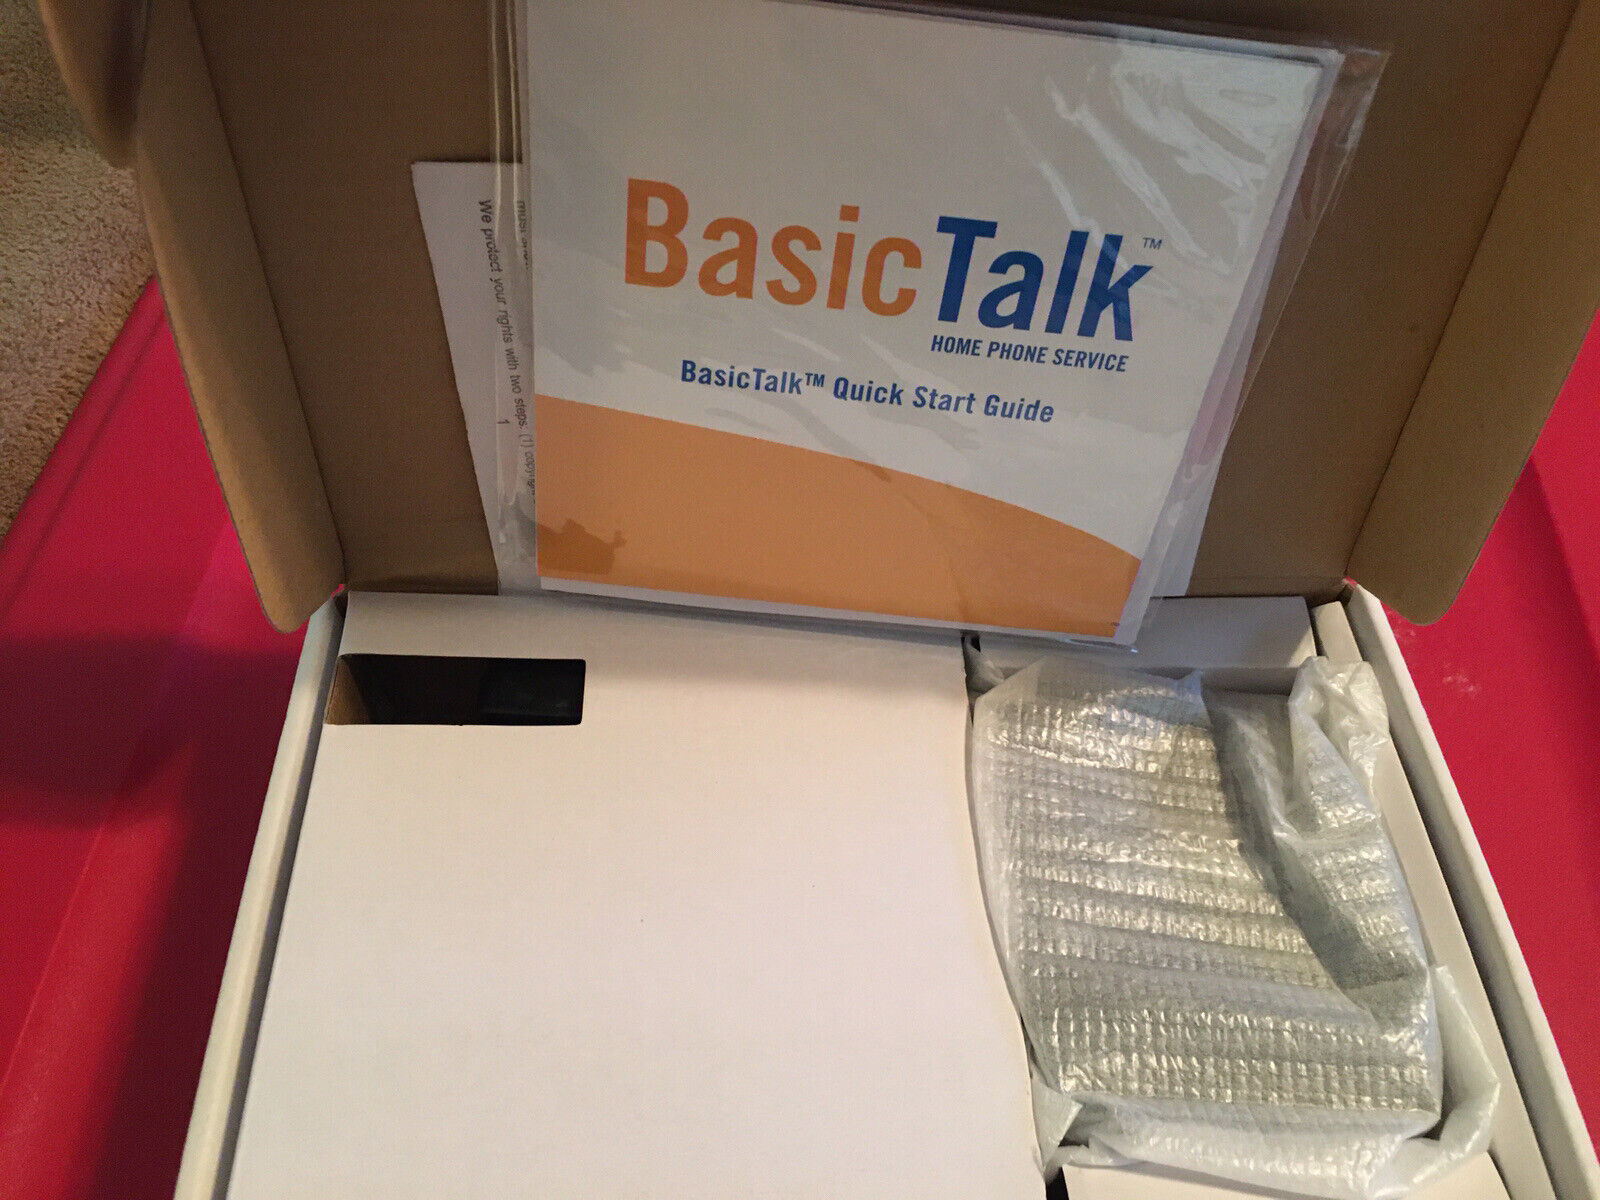 Basic Talk HT701 VoIP Home Phone Service Box - Mint Condition - Complete in Box